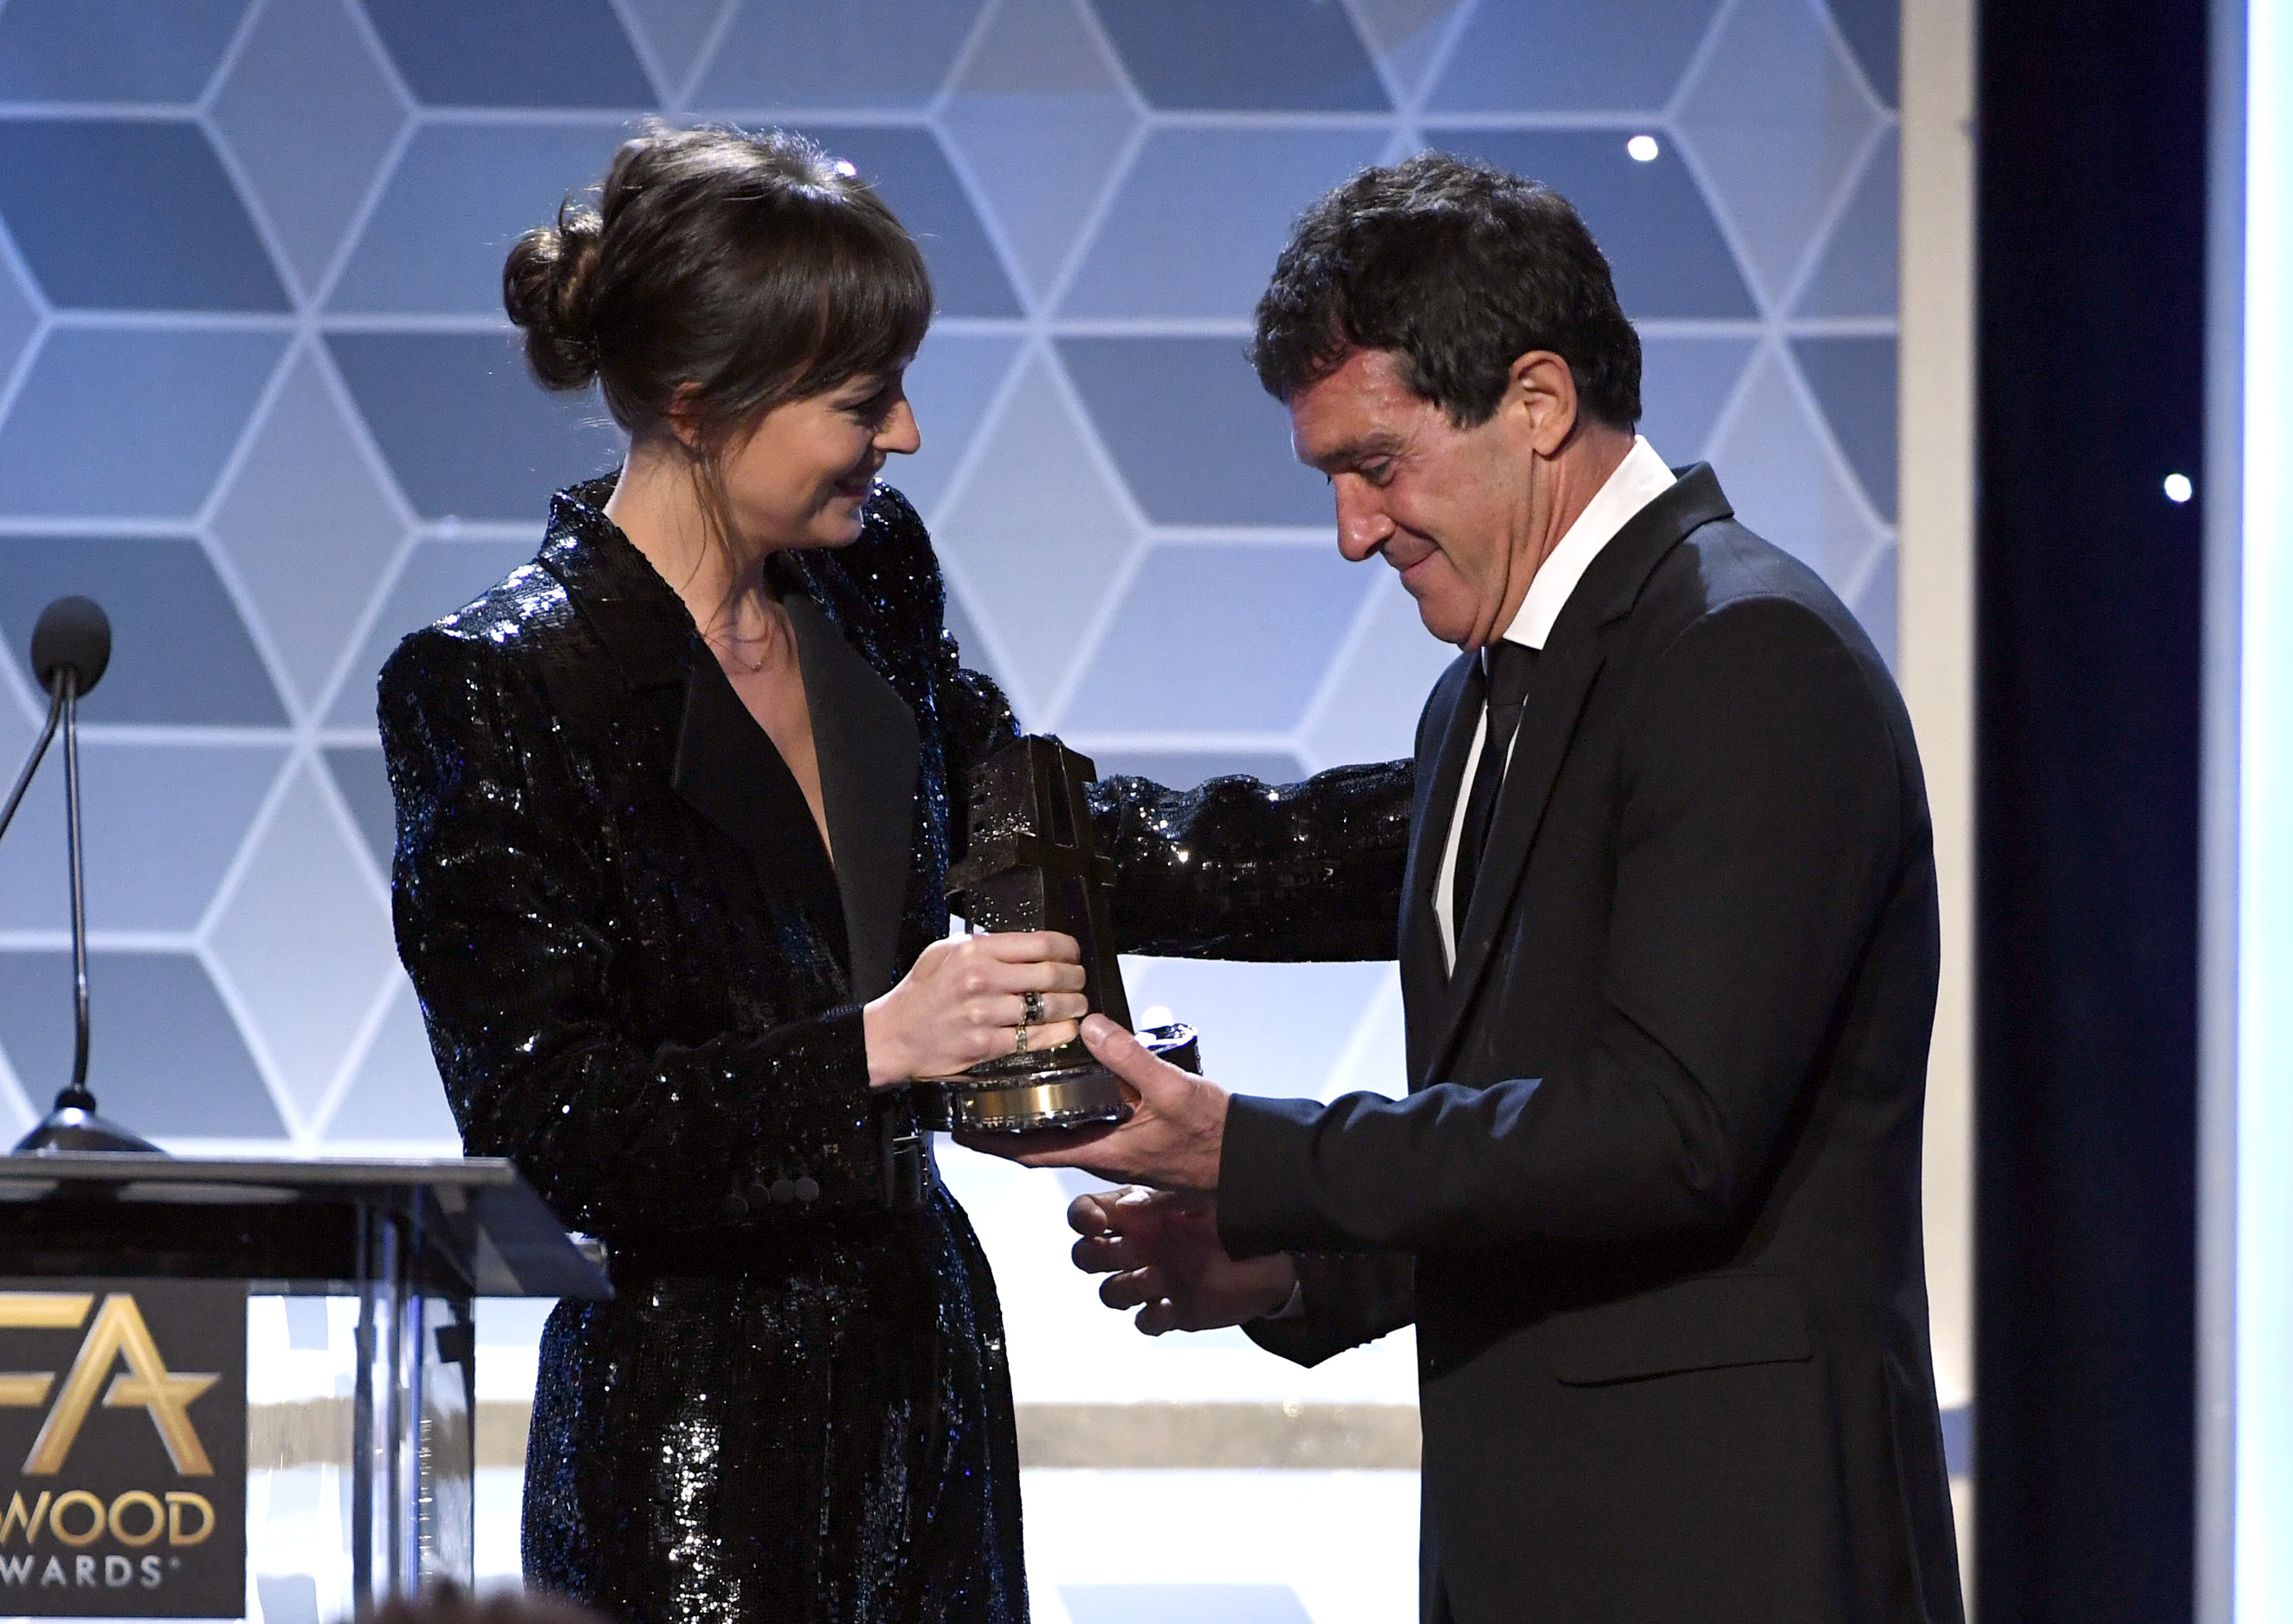 Dakota Johnson and Antonio Banderas at the 23rd Annual Hollywood Film Awards in Beverly Hills, California on November 3, 2019 | Source: Getty Images